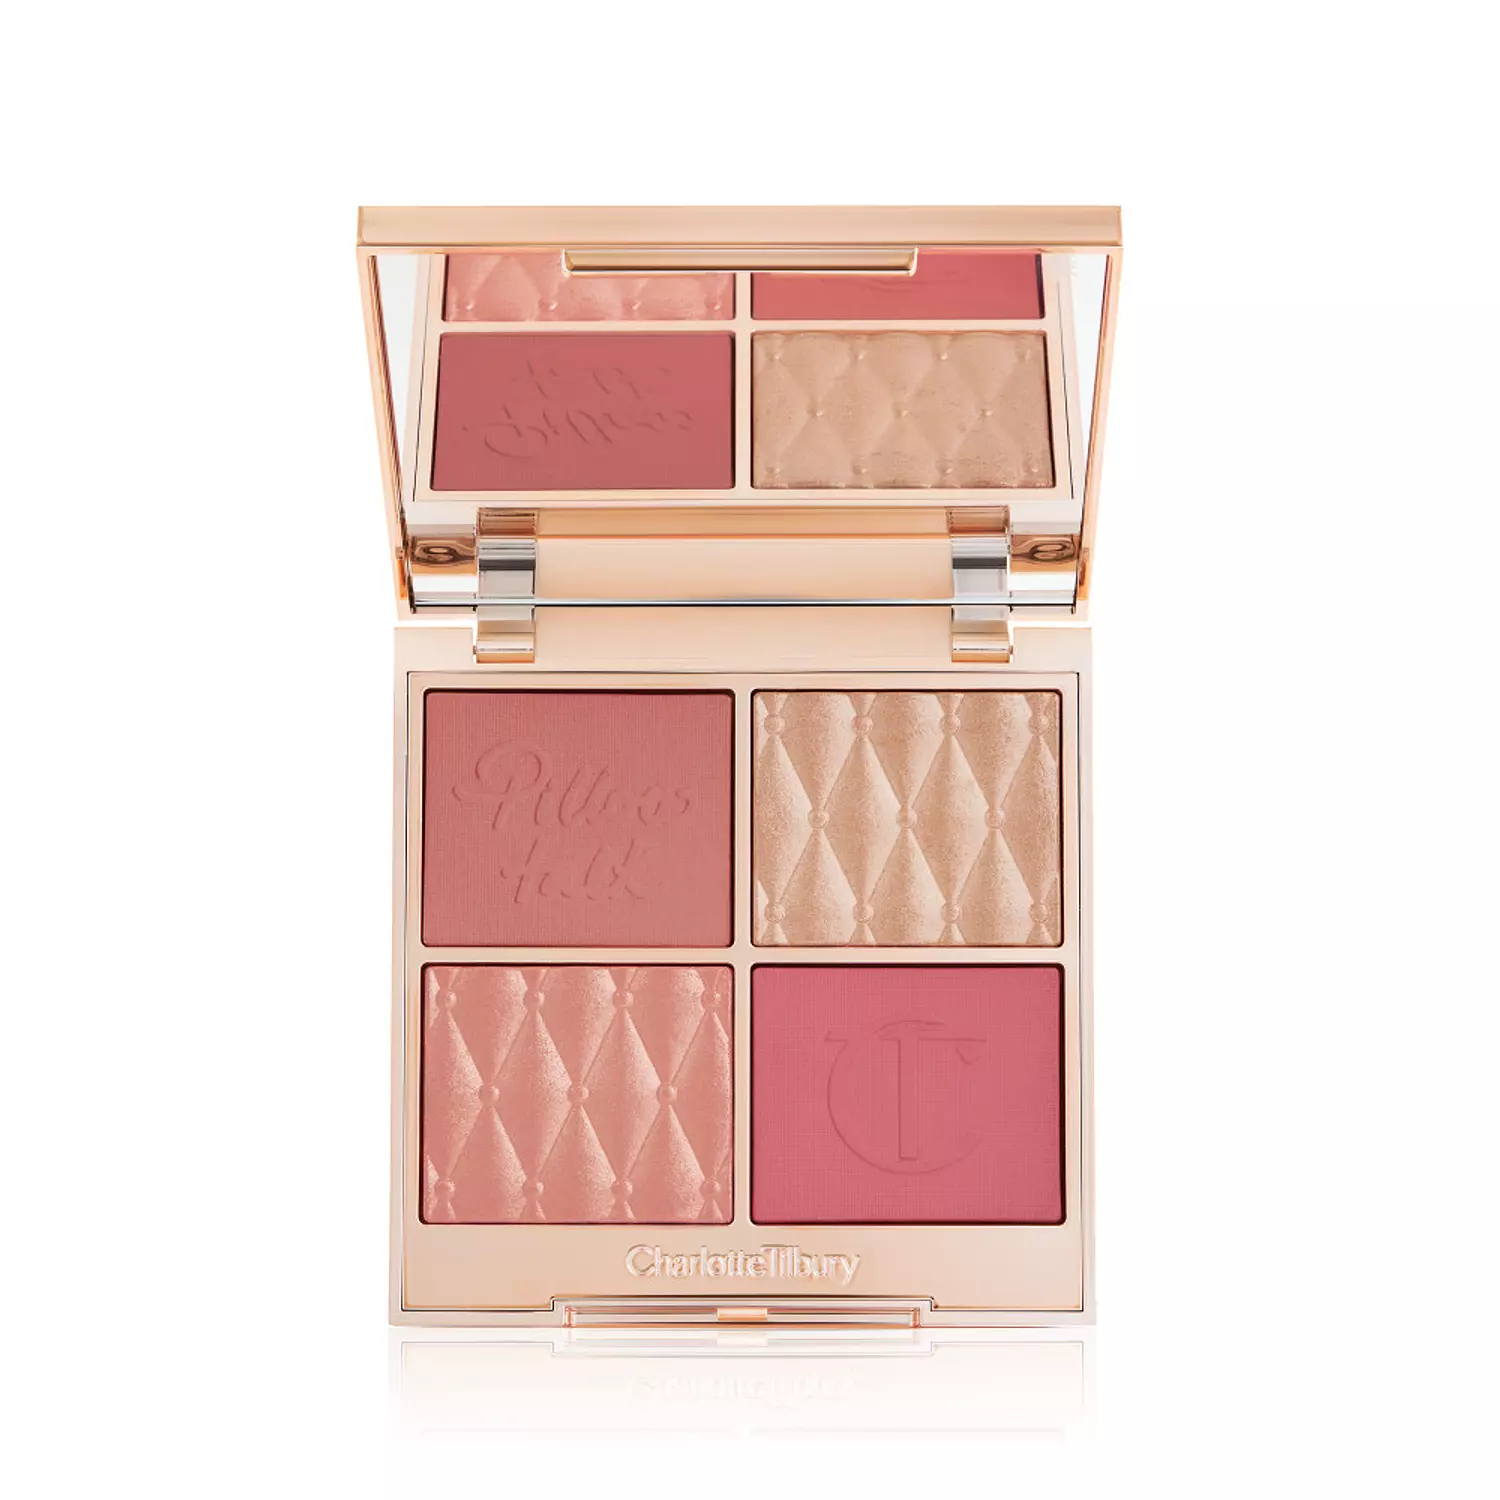 PILLOW TALK BEAUTIFYING FACE PALETTE | CHARLOTTE TILBURY hover image